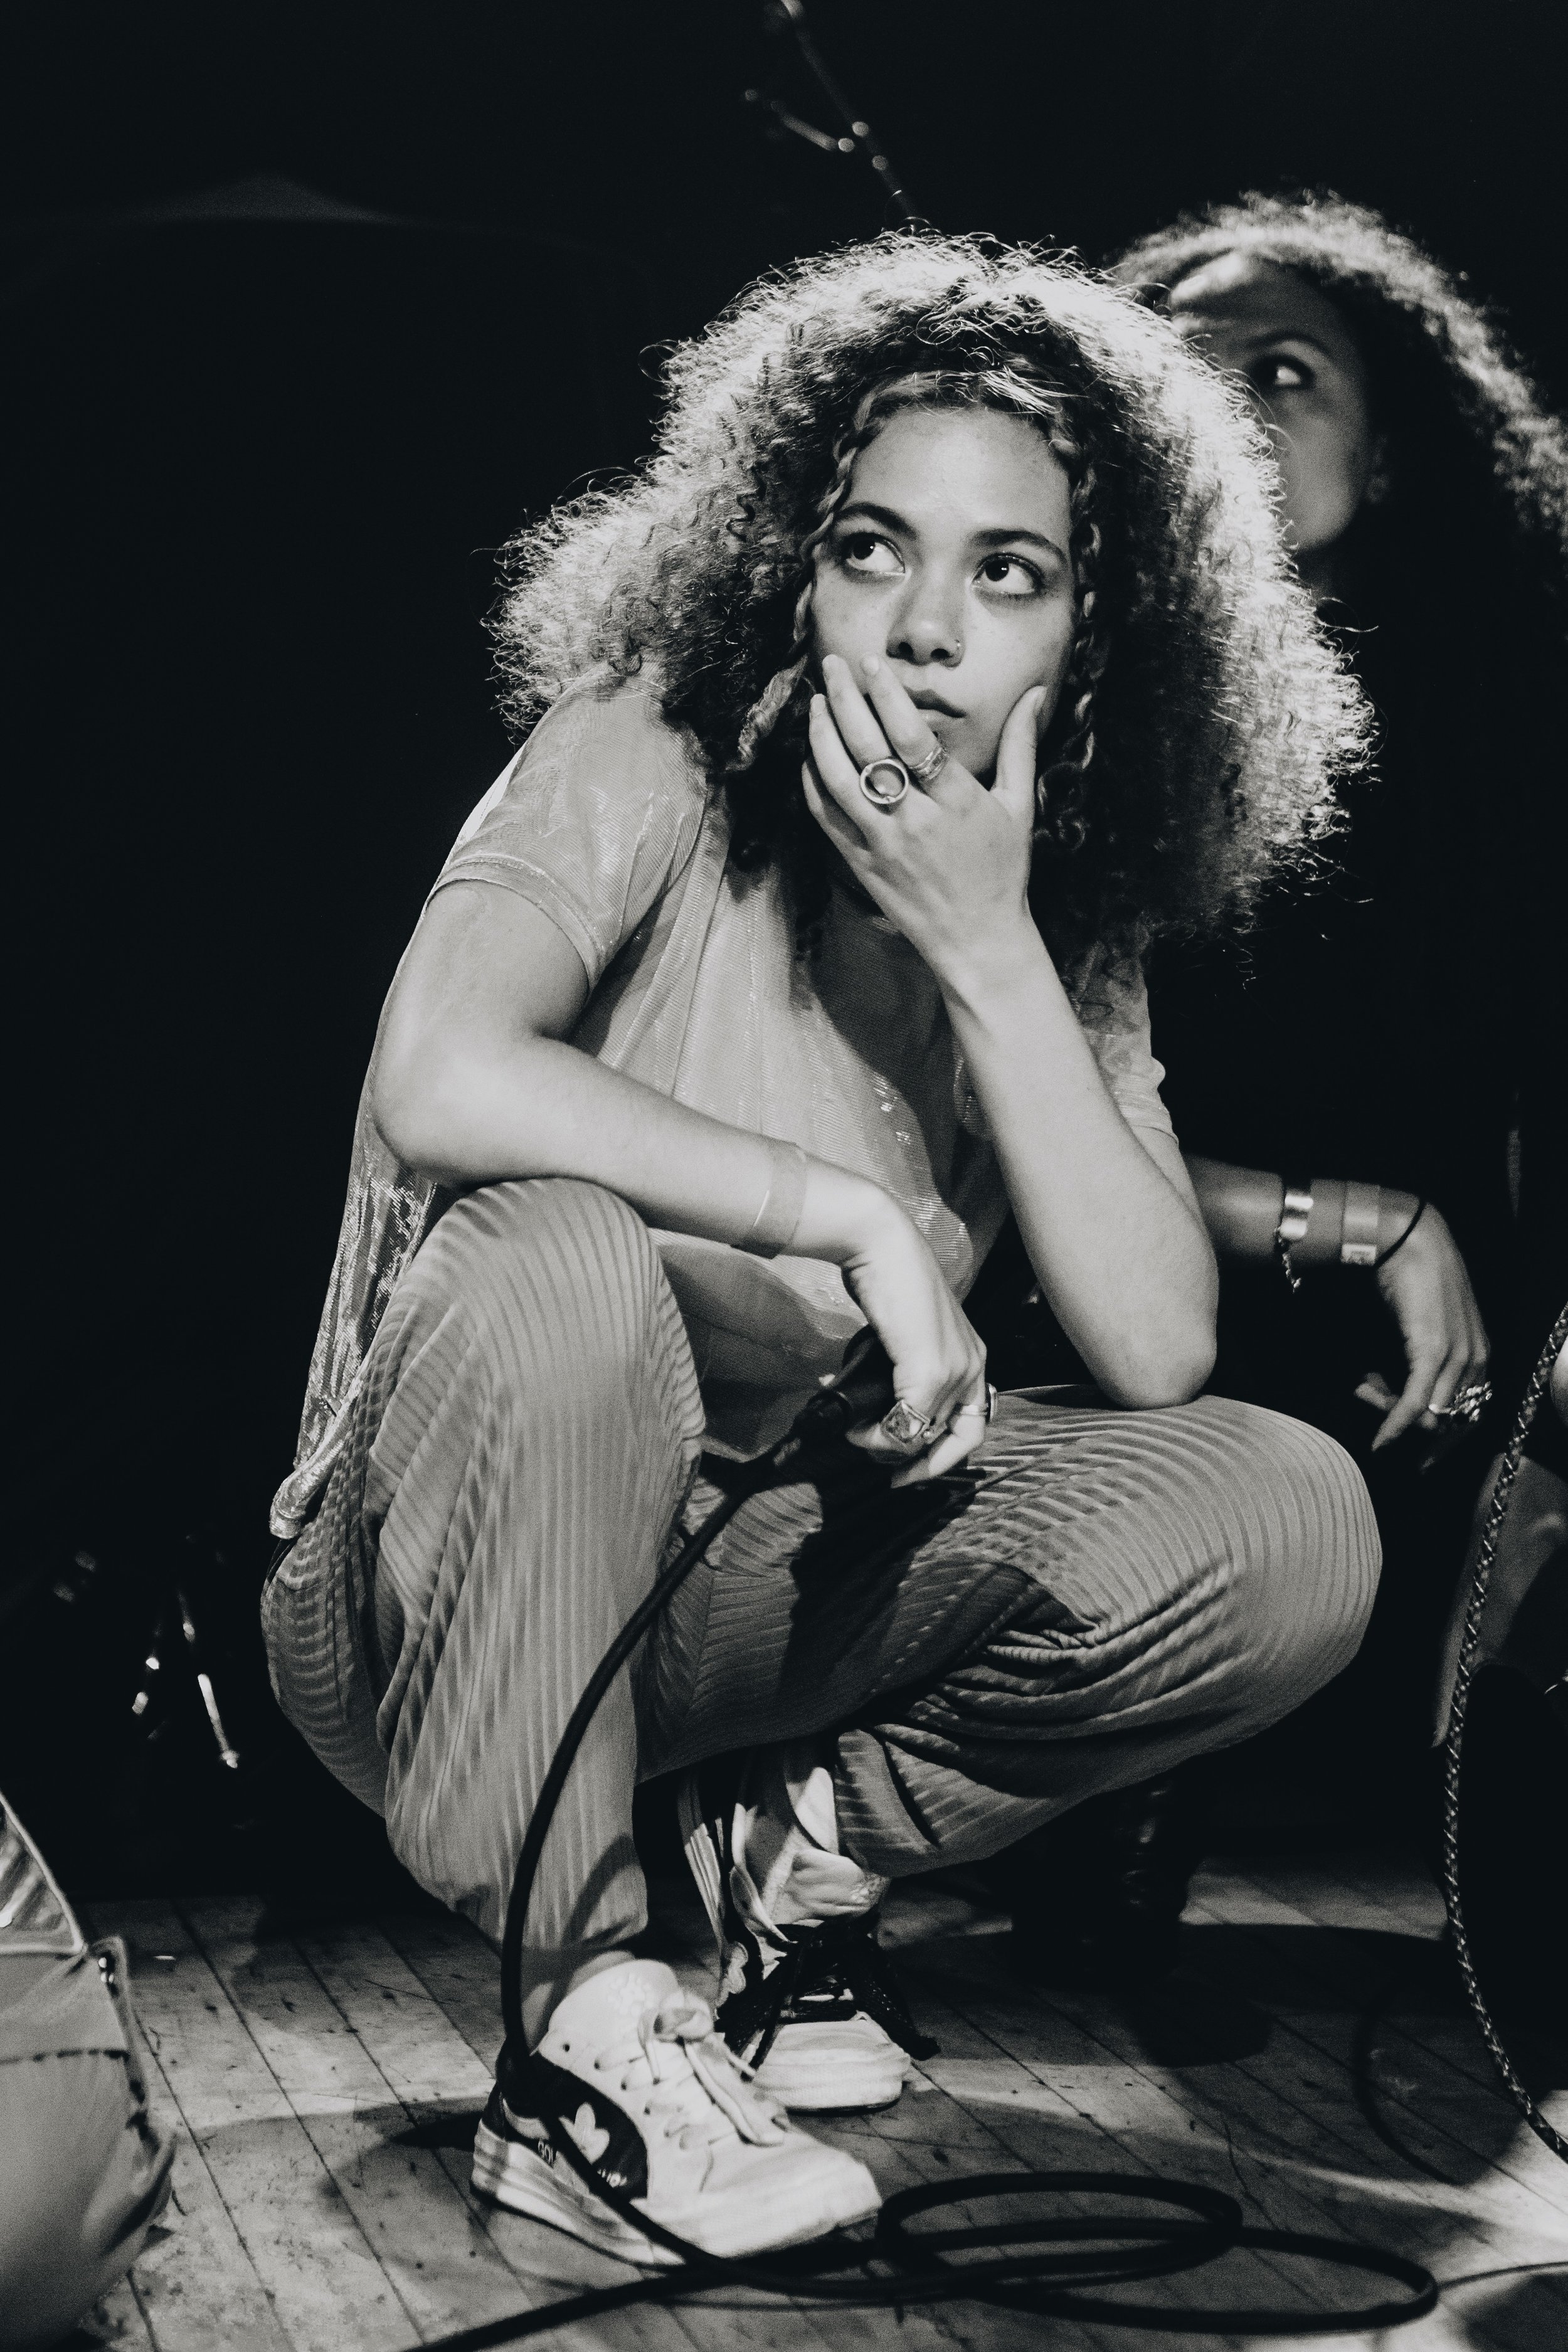 This black and white image depicts Isa, a member of the R&B collective MICHELLE. On the small stage of Warsaw she is joined by six other people. However, she is the sole subject of this image, crouched on stage and holding one hand up to her chin. This signifies a moment of contemplation, perhaps depicting Isa marveling at the audience (the largest MICHELLE has performed for to date).